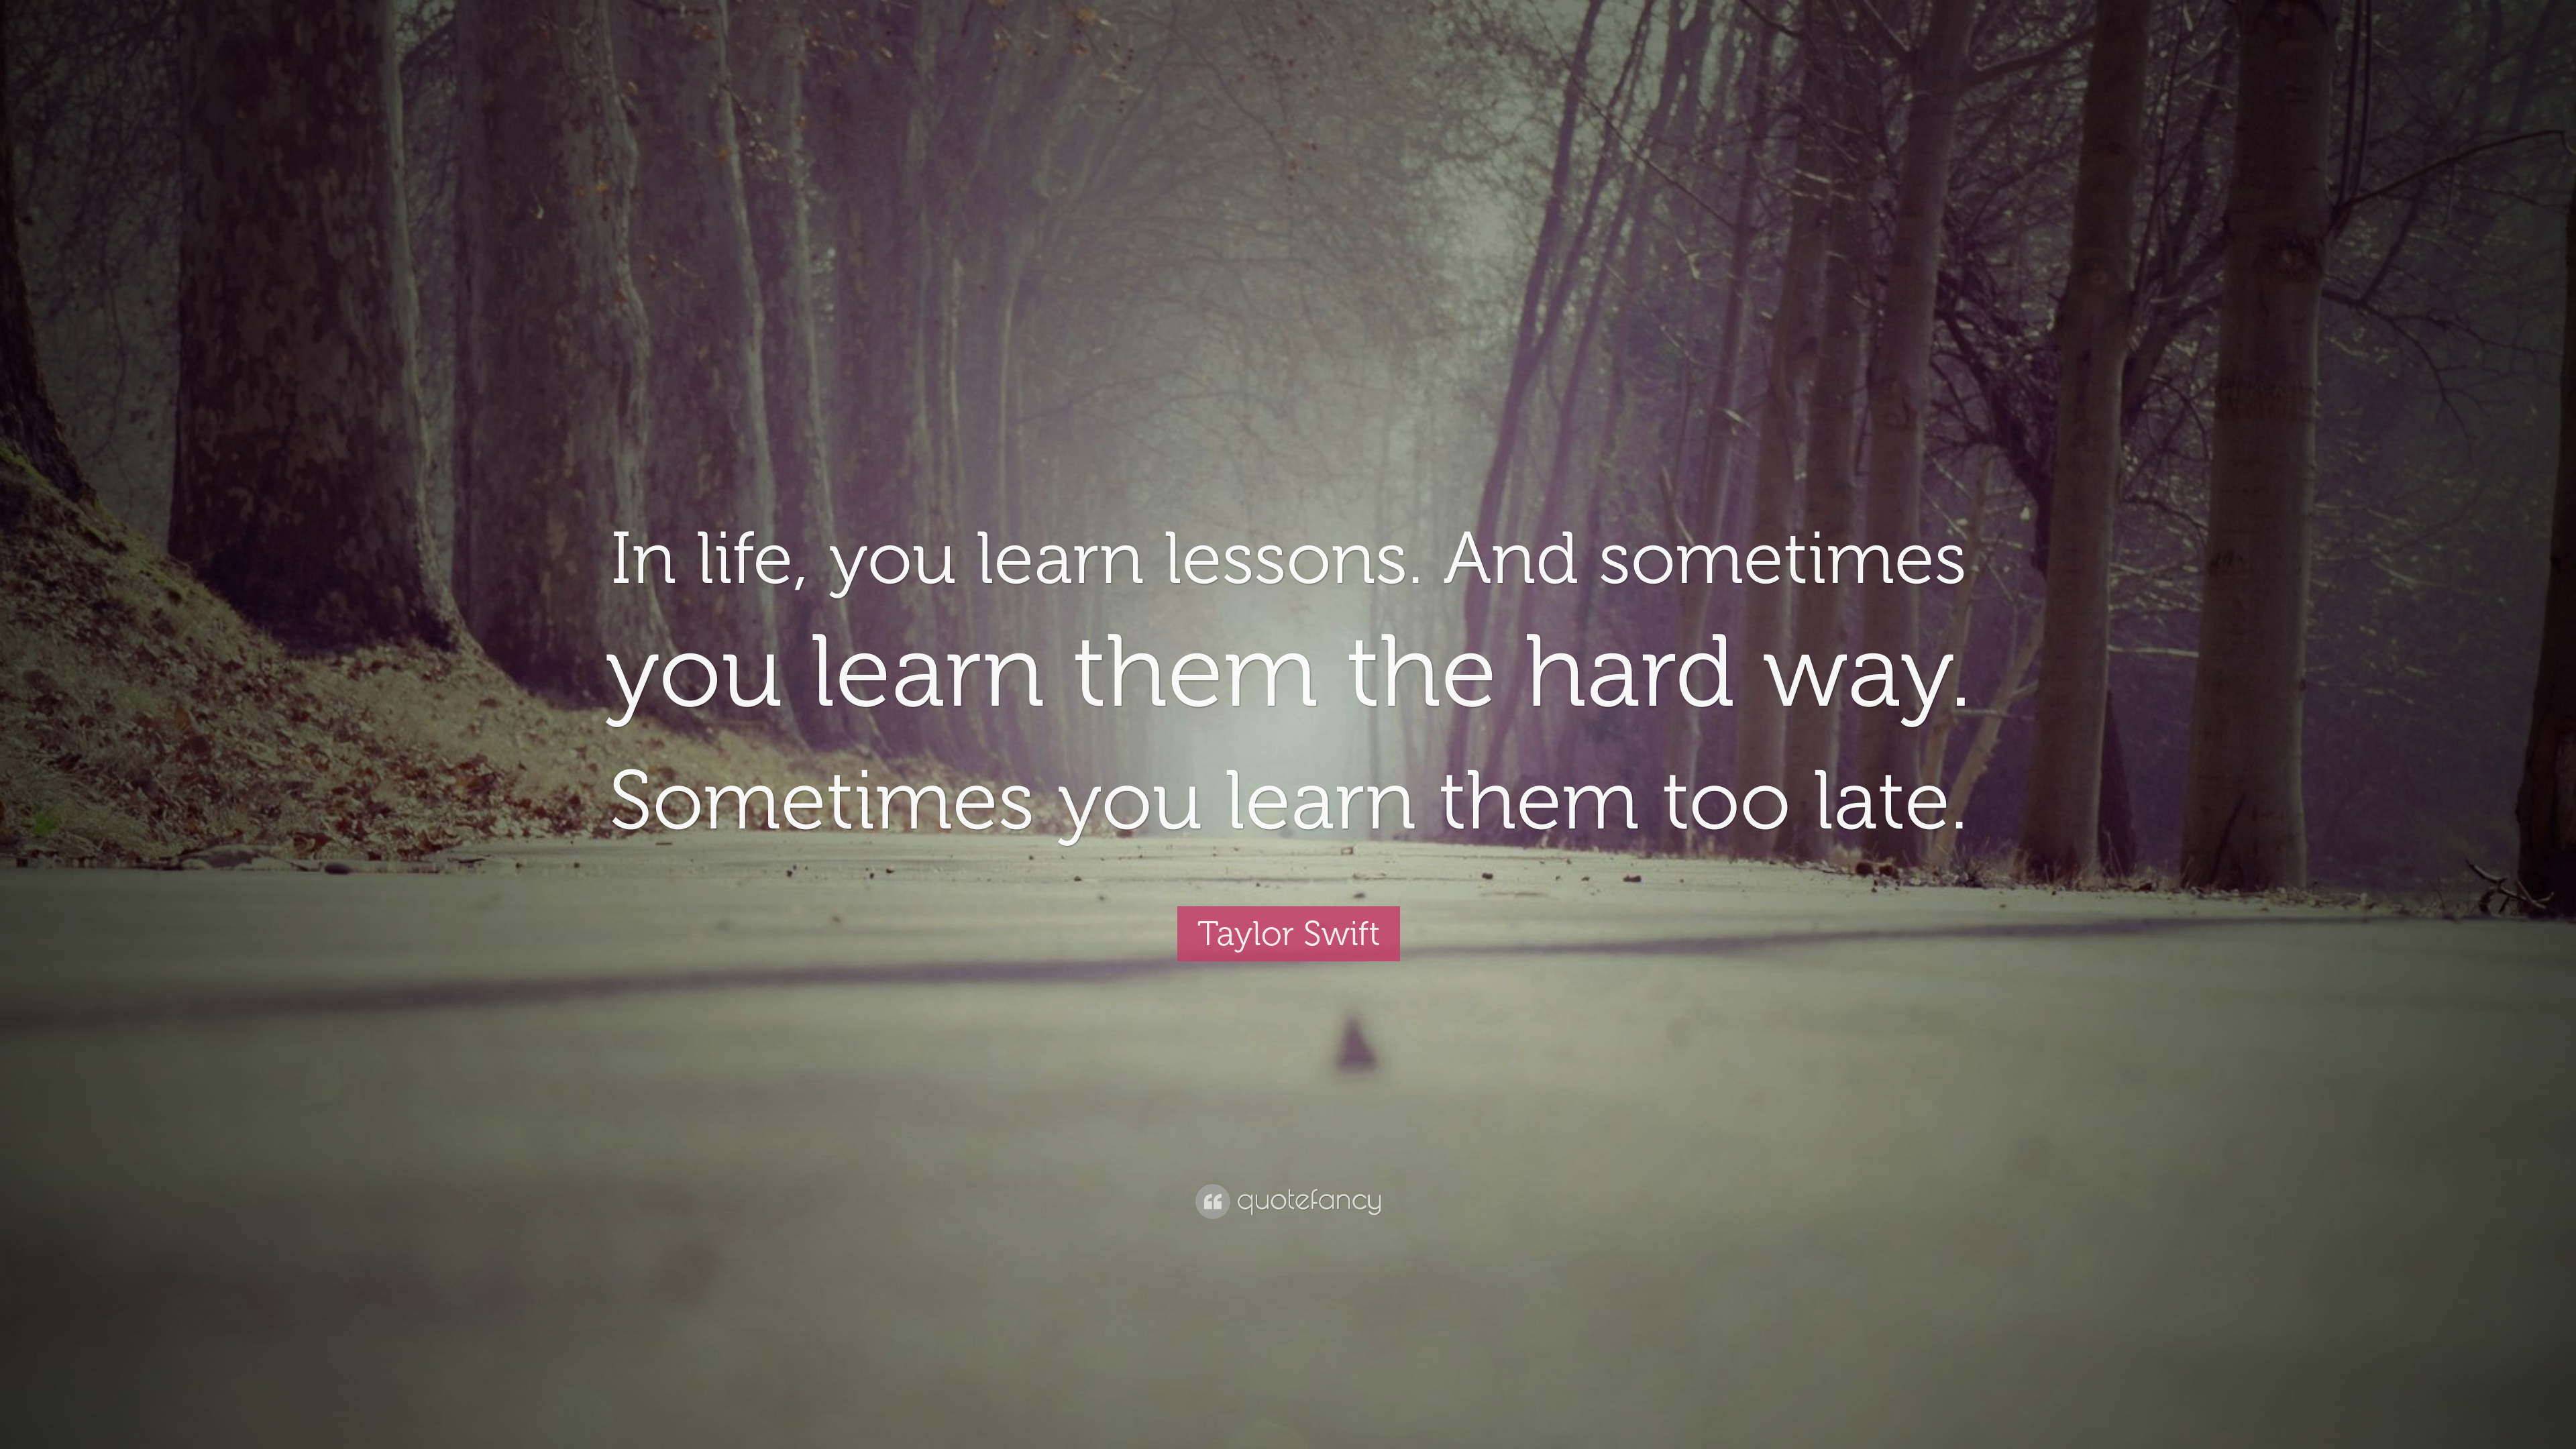 Taylor Swift Quote: “In life, you learn lessons. And sometimes you learn them the hard way